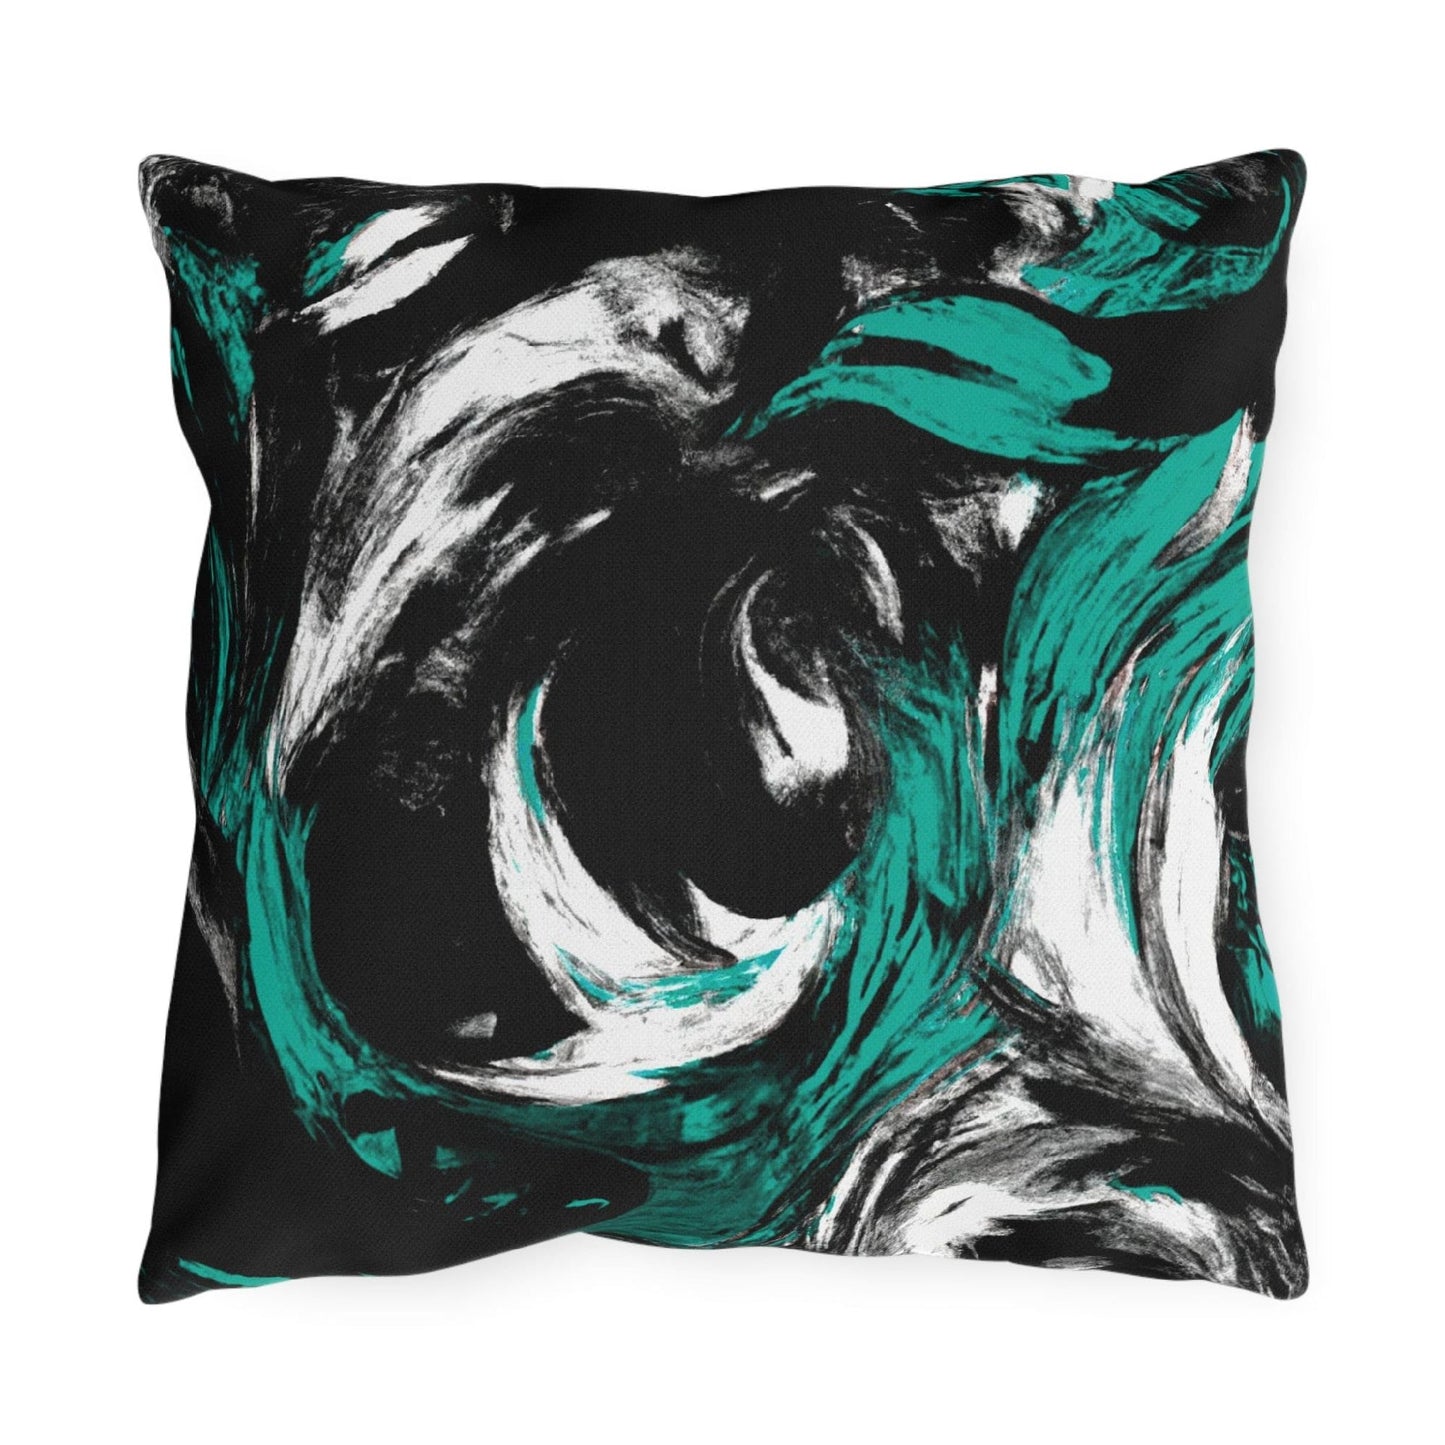 Decorative Outdoor Pillows With Zipper - Set Of 2, Black Green White Abstract Pattern